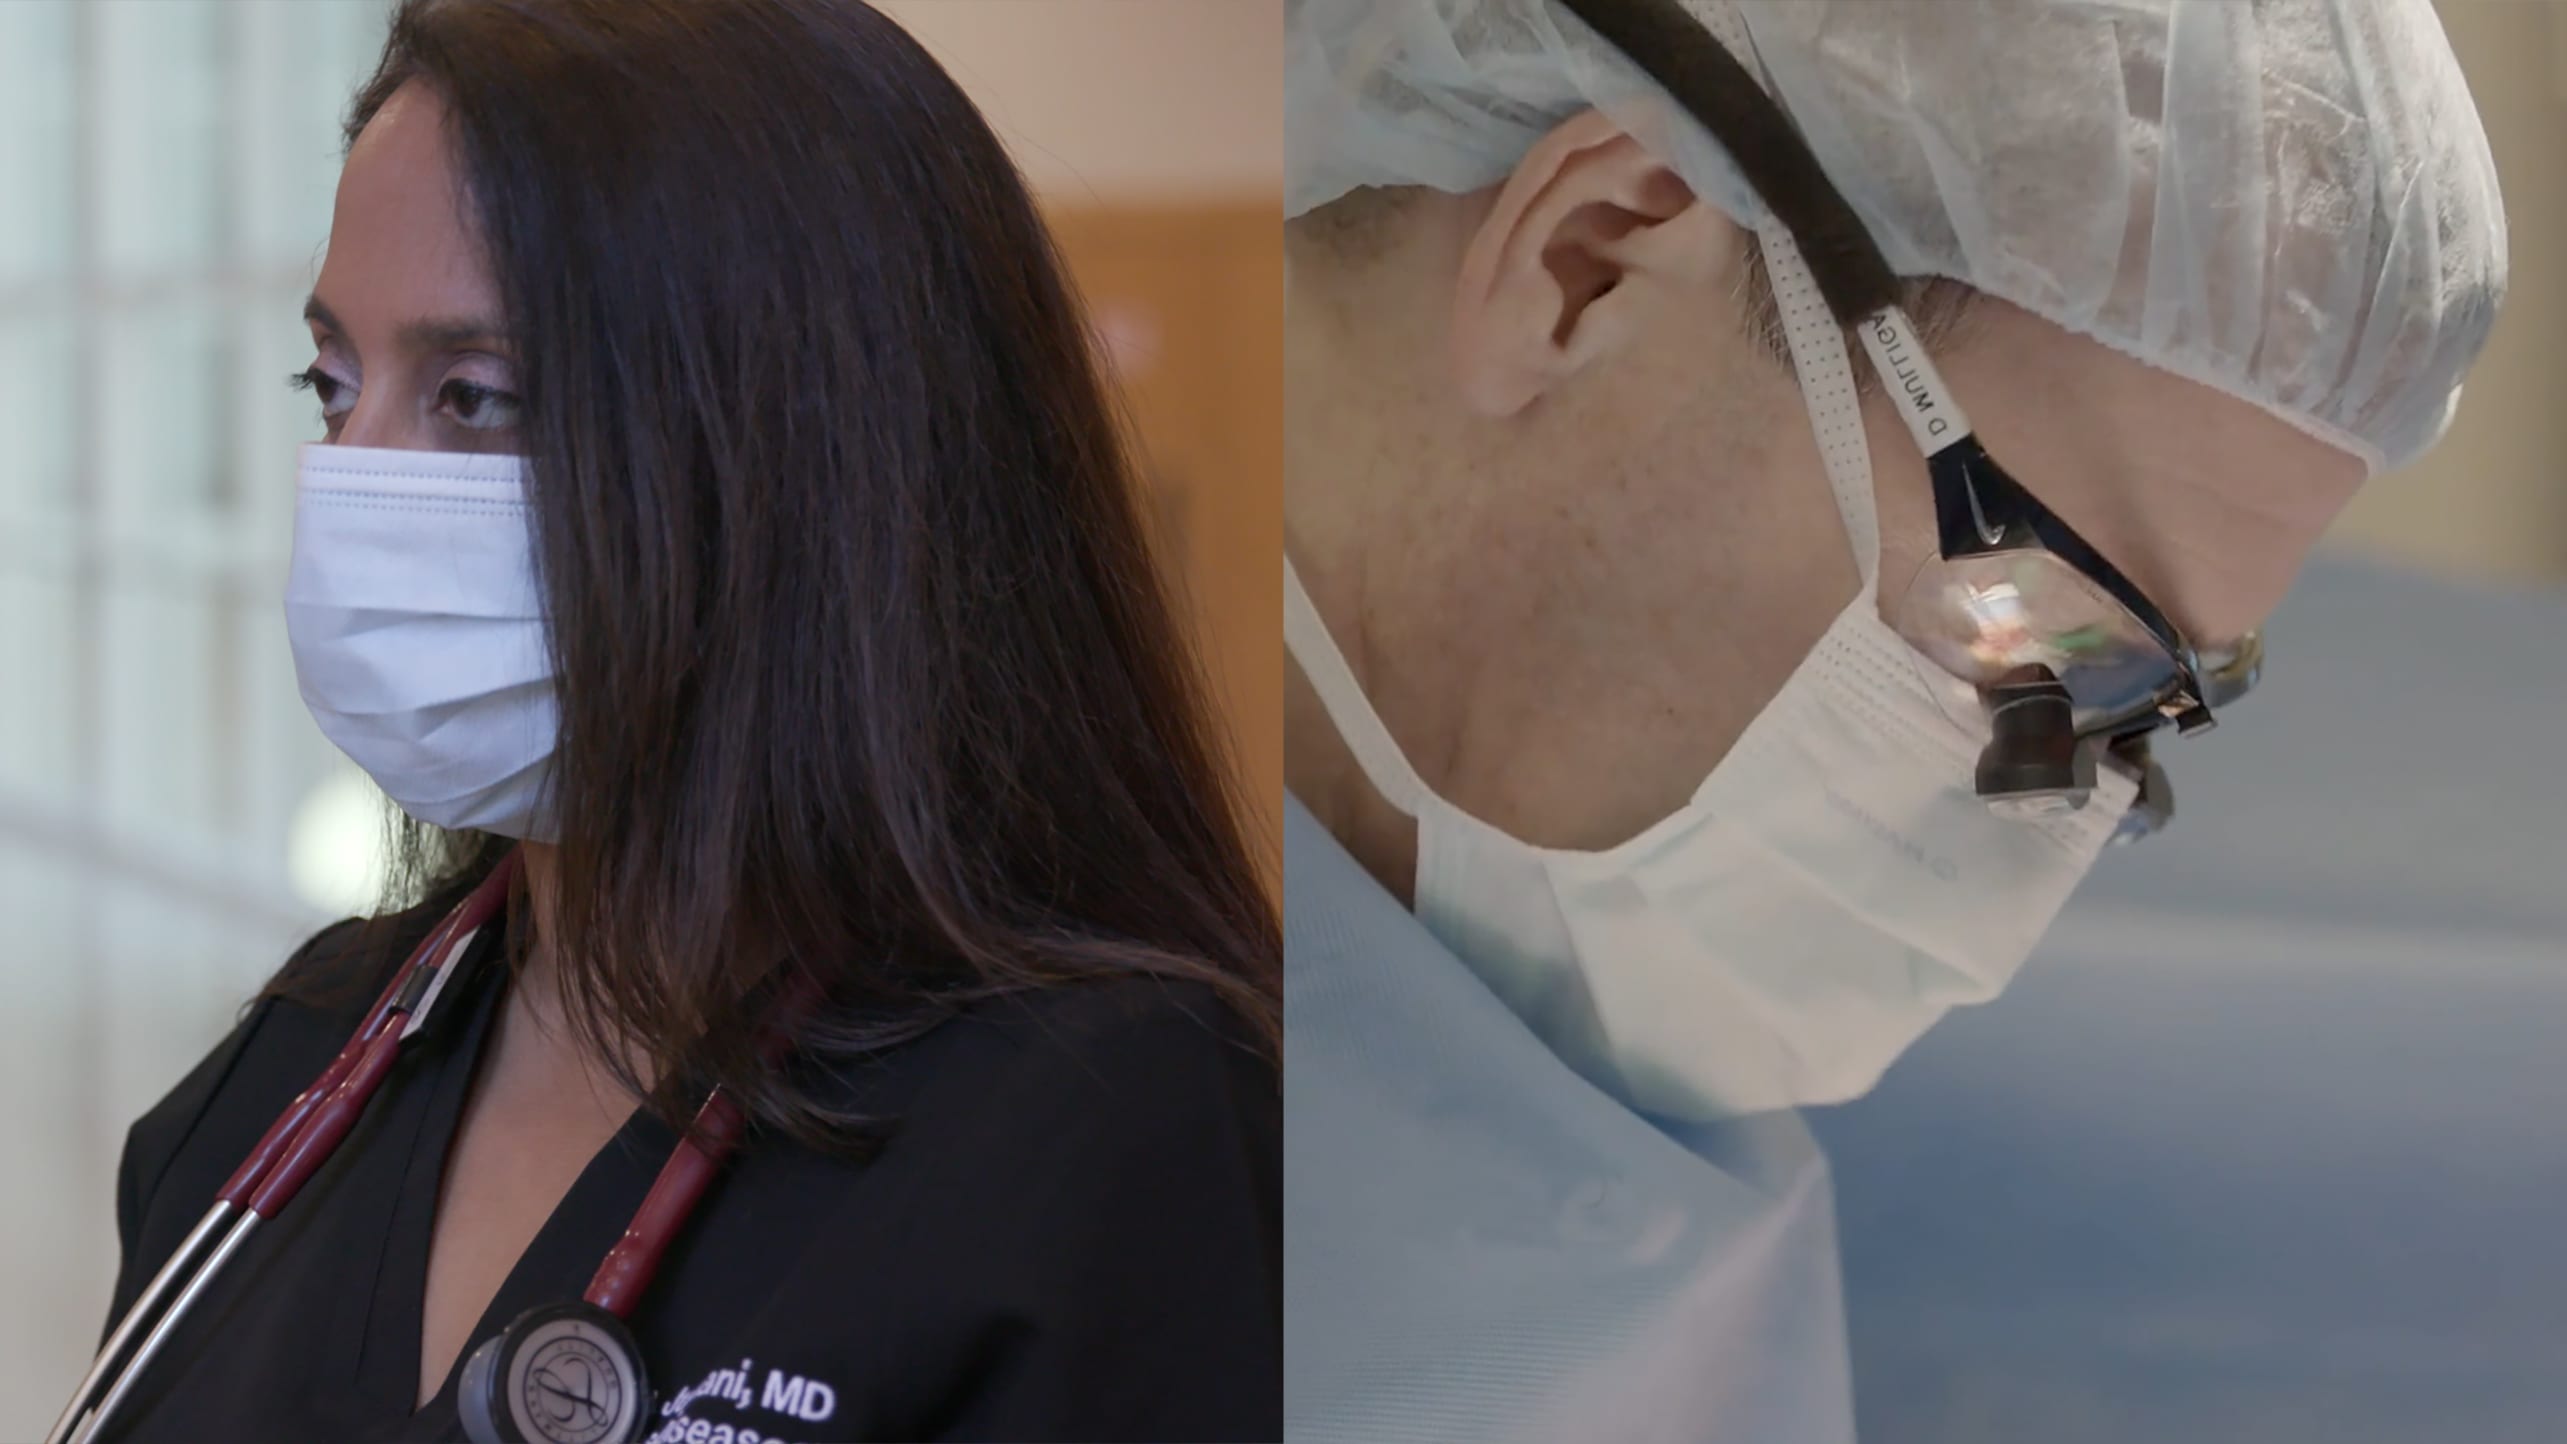 A split screen of a surgeon operating and a doctor speaking to someone with a mask on.